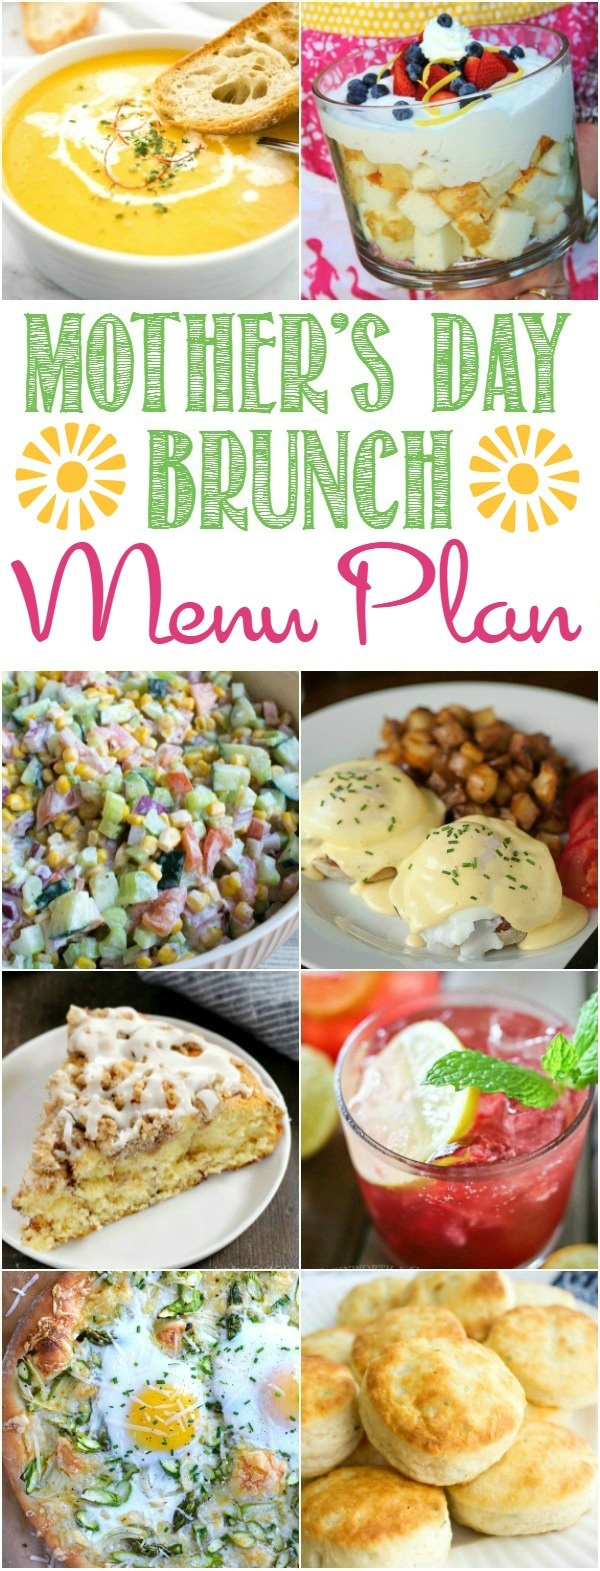 I've put together a simple and delicious Mother's Day Menu Plan this month.  It will be perfect for a casual gathering or even a formal brunch with the whole extended family! #mothersday #menuplan via @slingmama